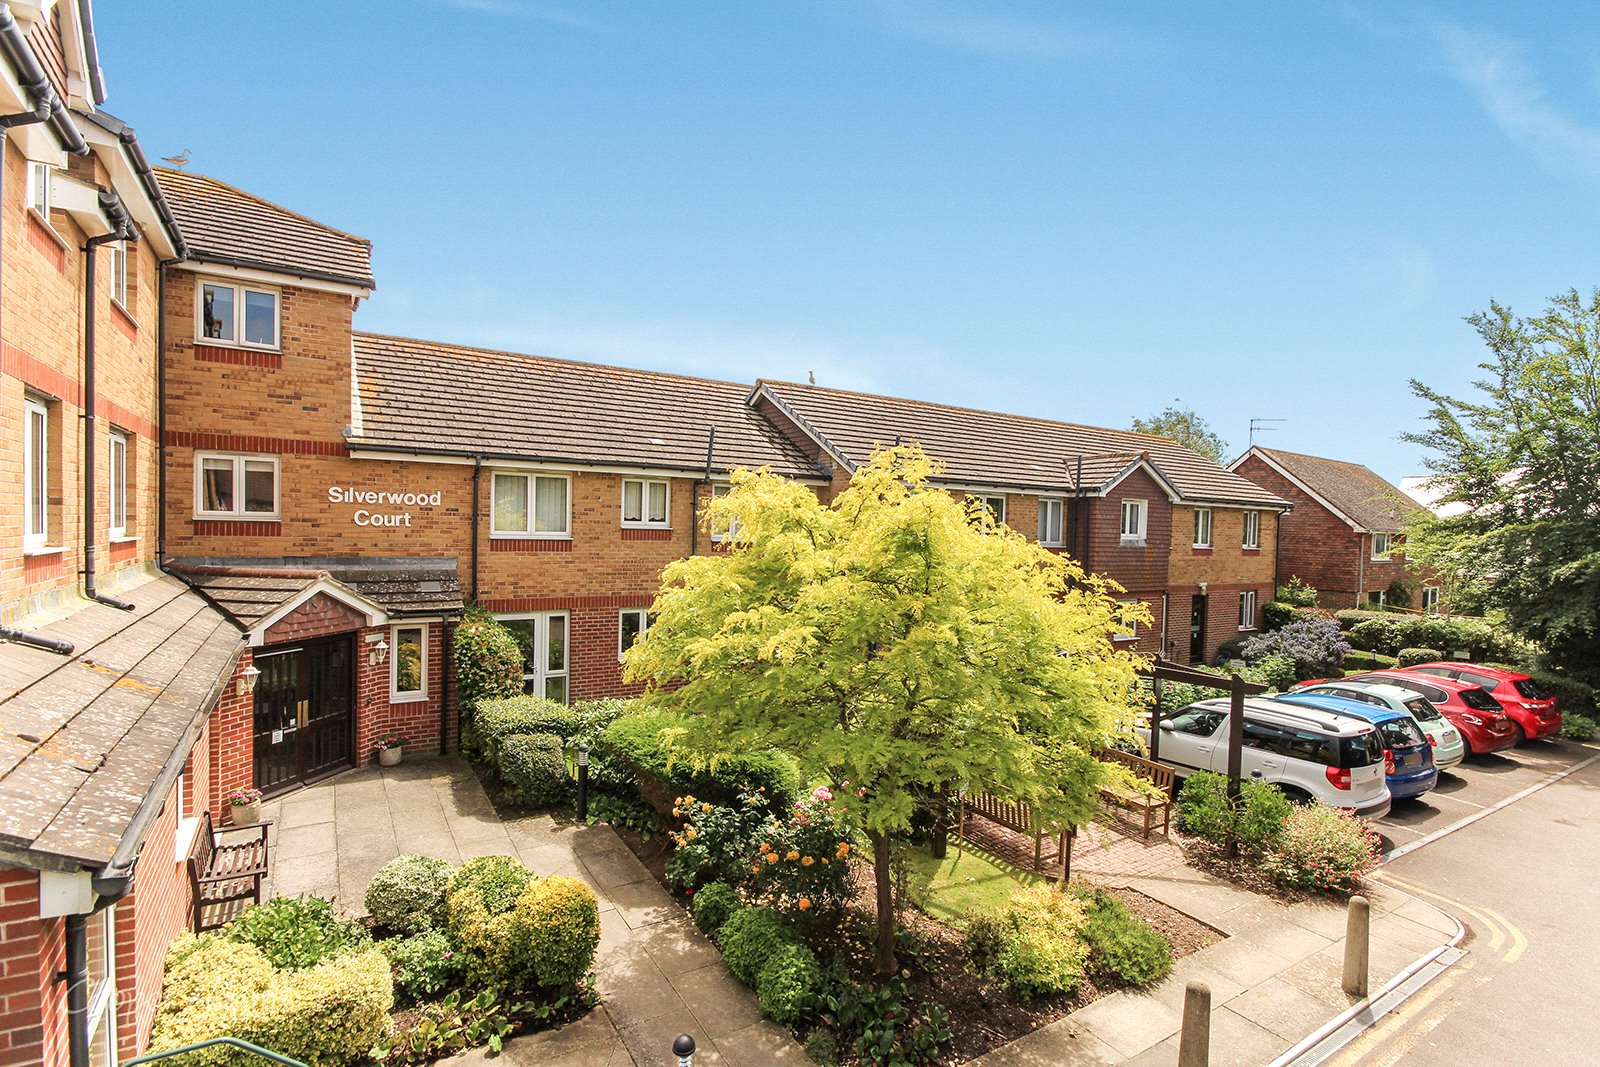 1 bed apartment for sale in Silverwood Court, Wakehurst Place, BN16